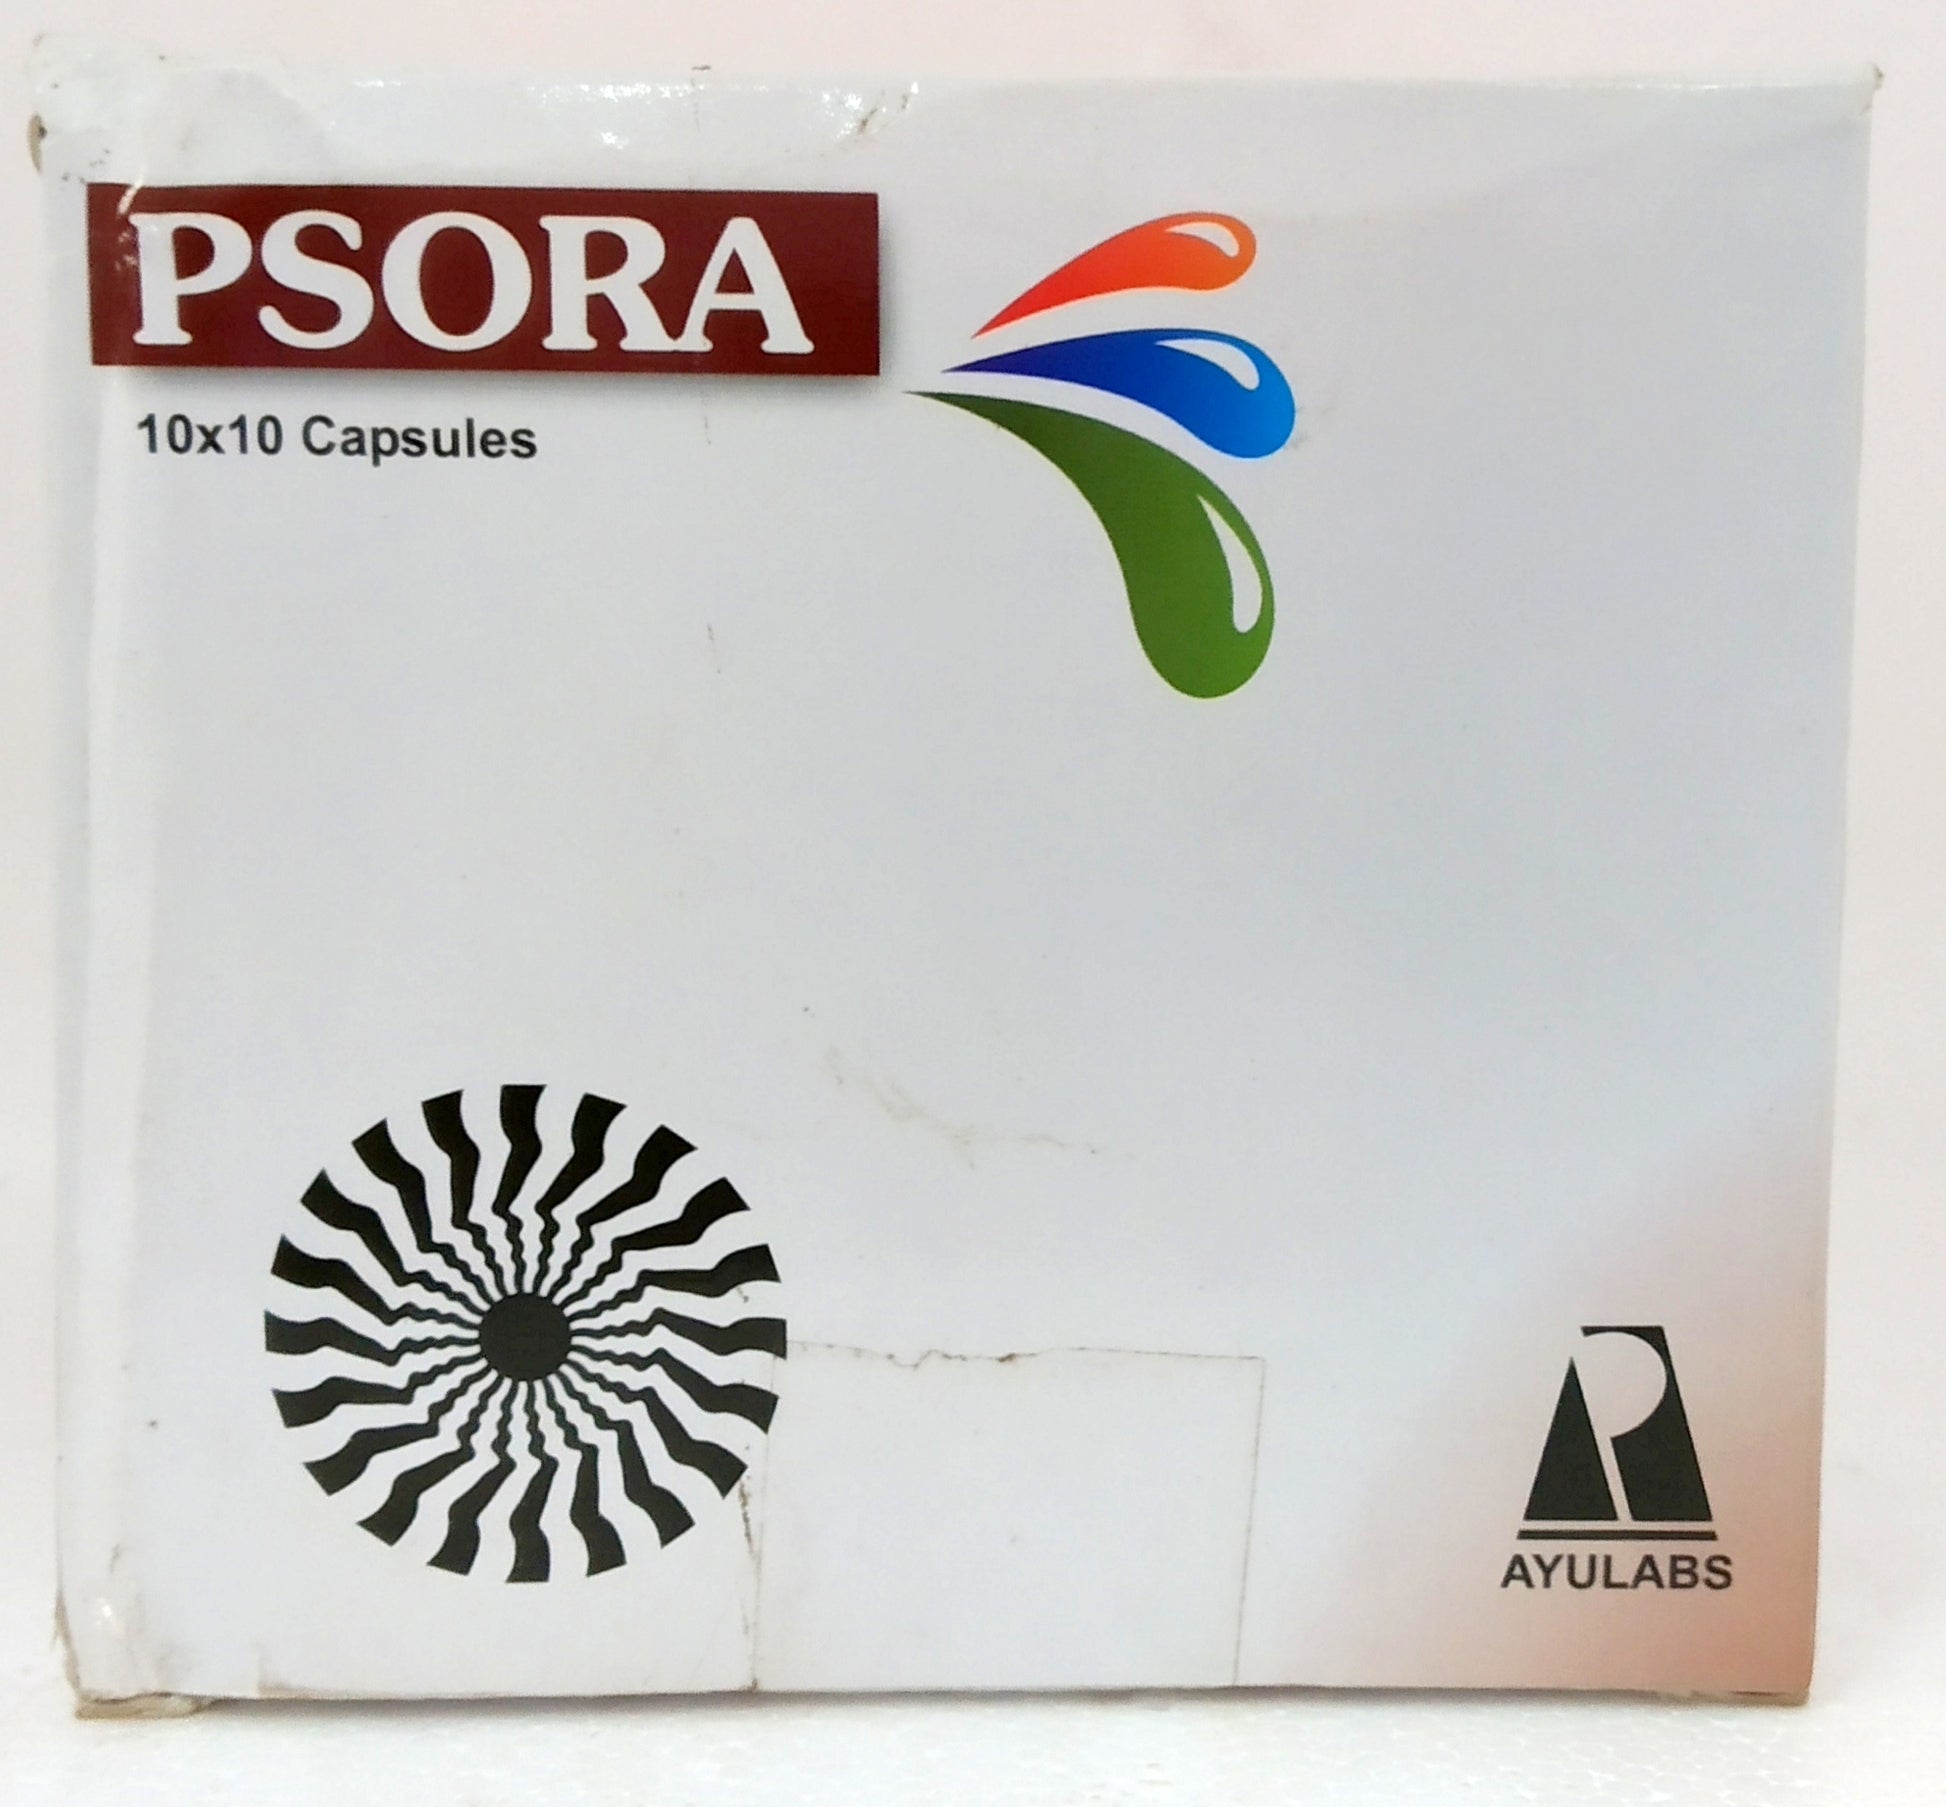 Shop Psora 10Capsules at price 63.00 from Ayulabs Online - Ayush Care